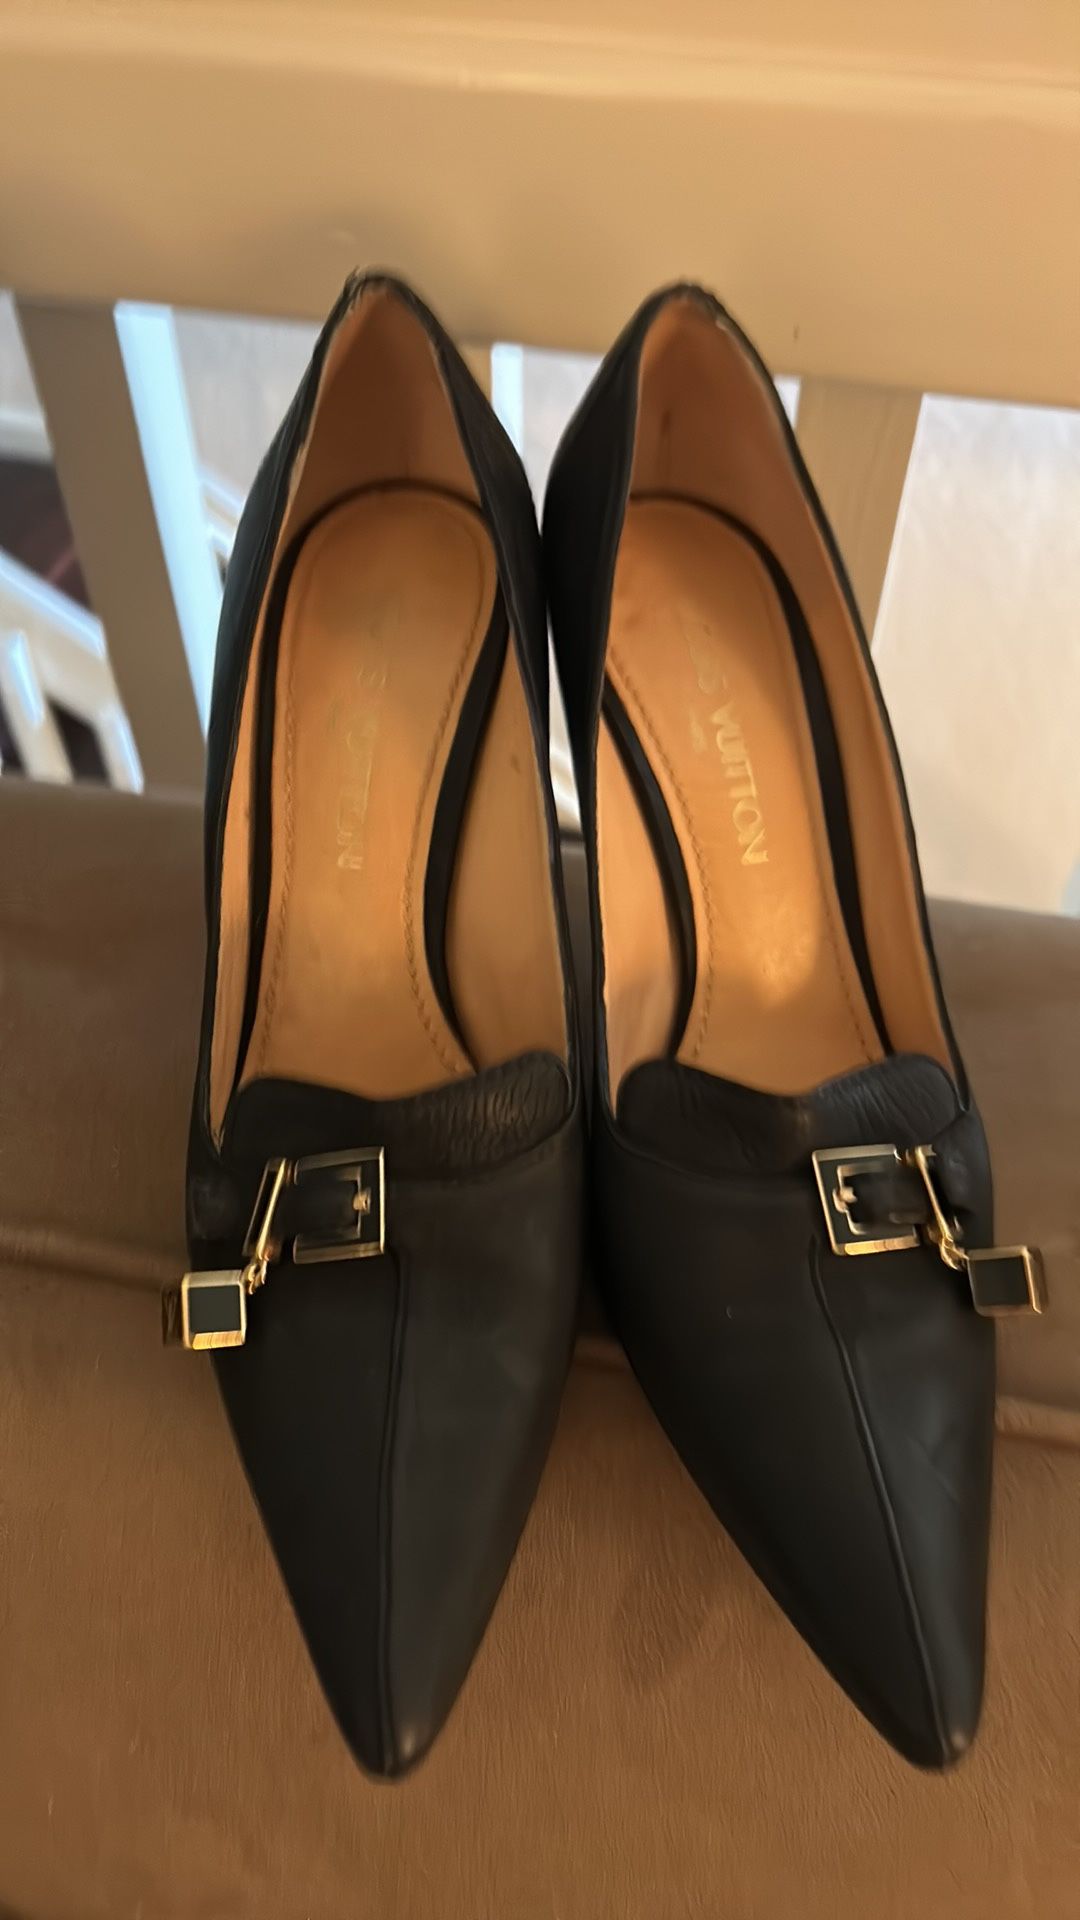 Designer Shoes, Vuitton Size 9 for in Naples, FL - OfferUp